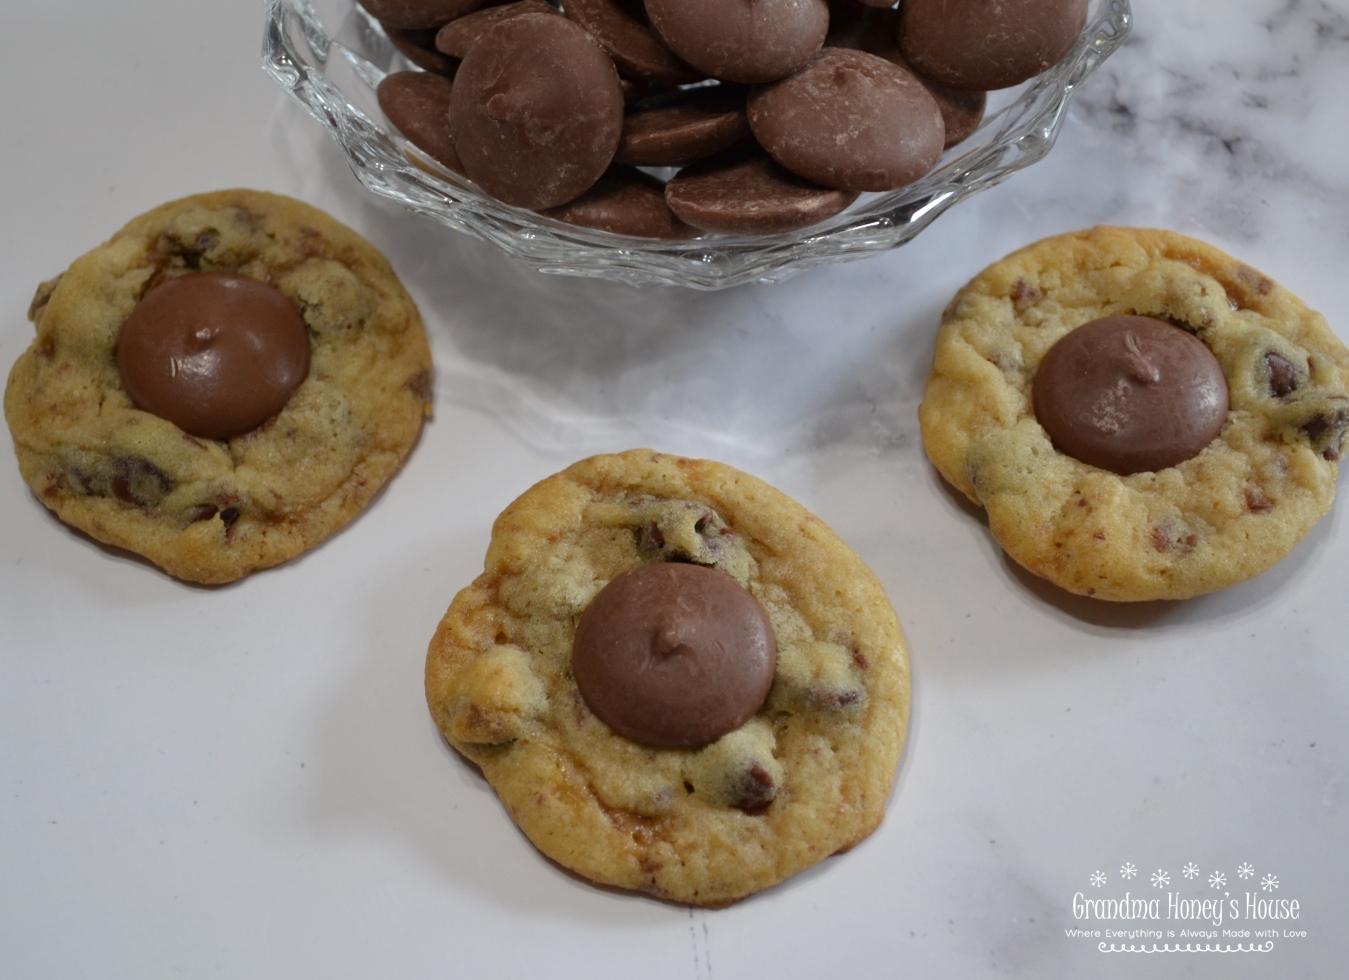 Chocolate Chip Toffee Thumbprint Cookies are a soft cookie loaded with chocolate chips,toffee bits and a Ghirardelli chocolate wafer added to center after baked.